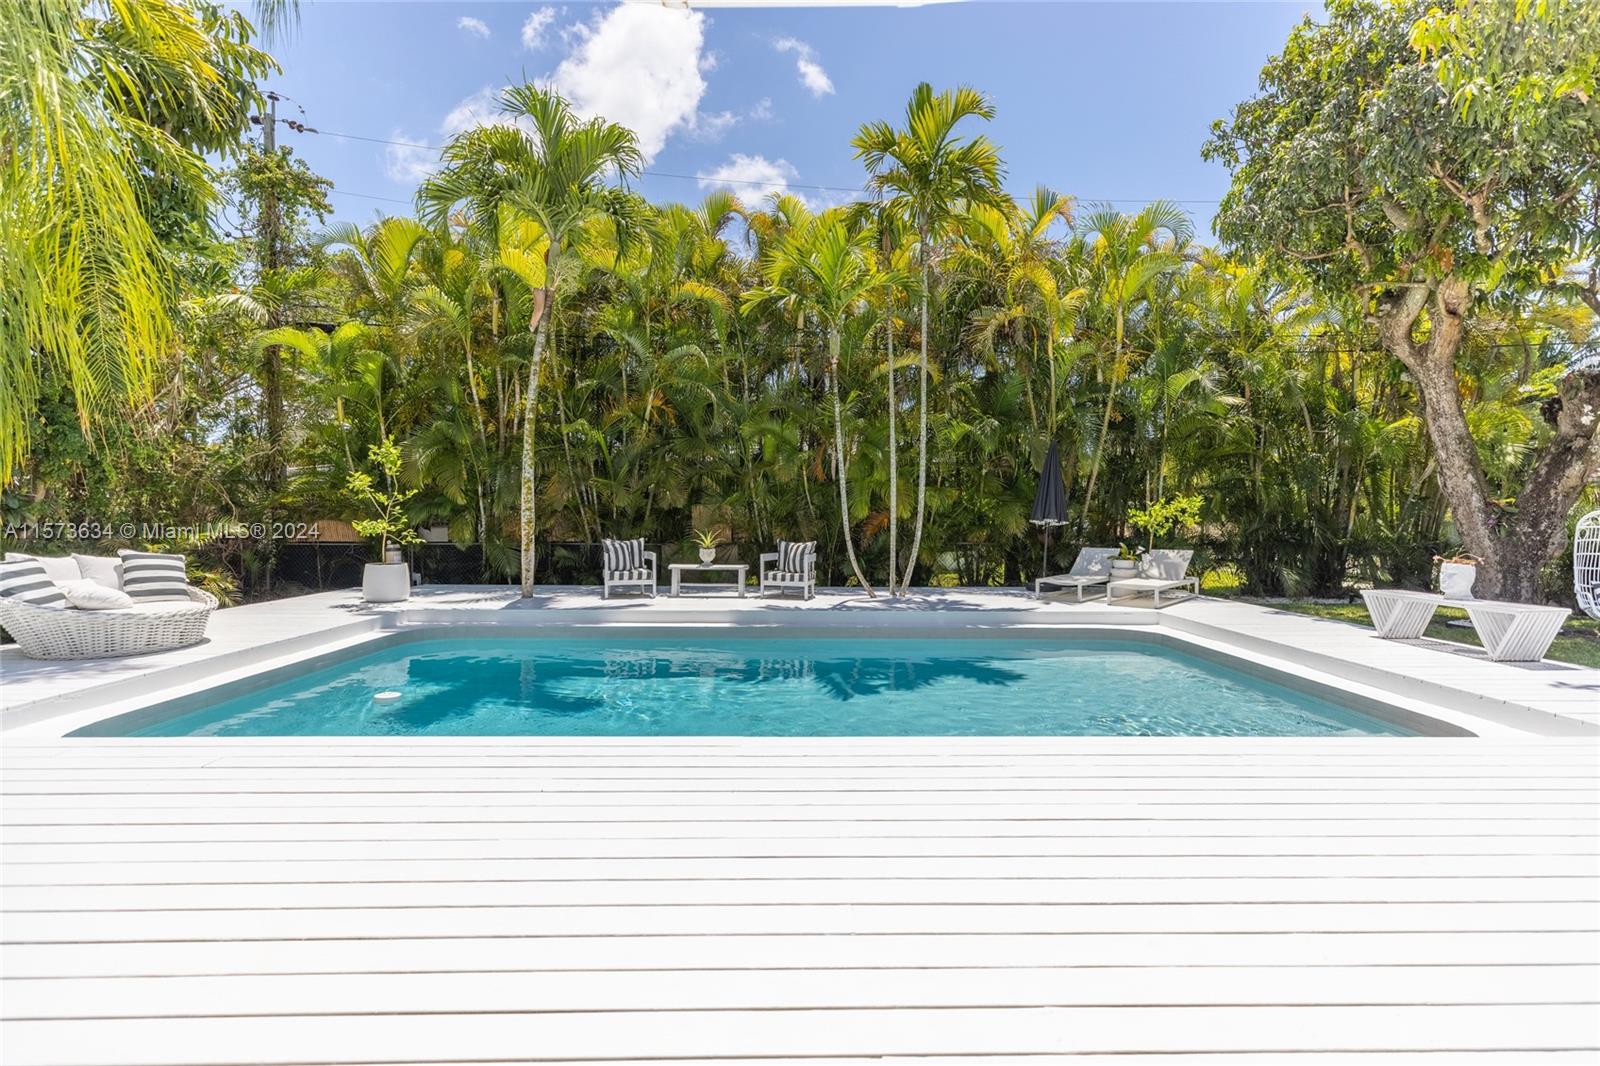 Property for Sale at 148 Nw 96th St St, Miami Shores, Miami-Dade County, Florida - Bedrooms: 4 
Bathrooms: 3  - $1,749,000